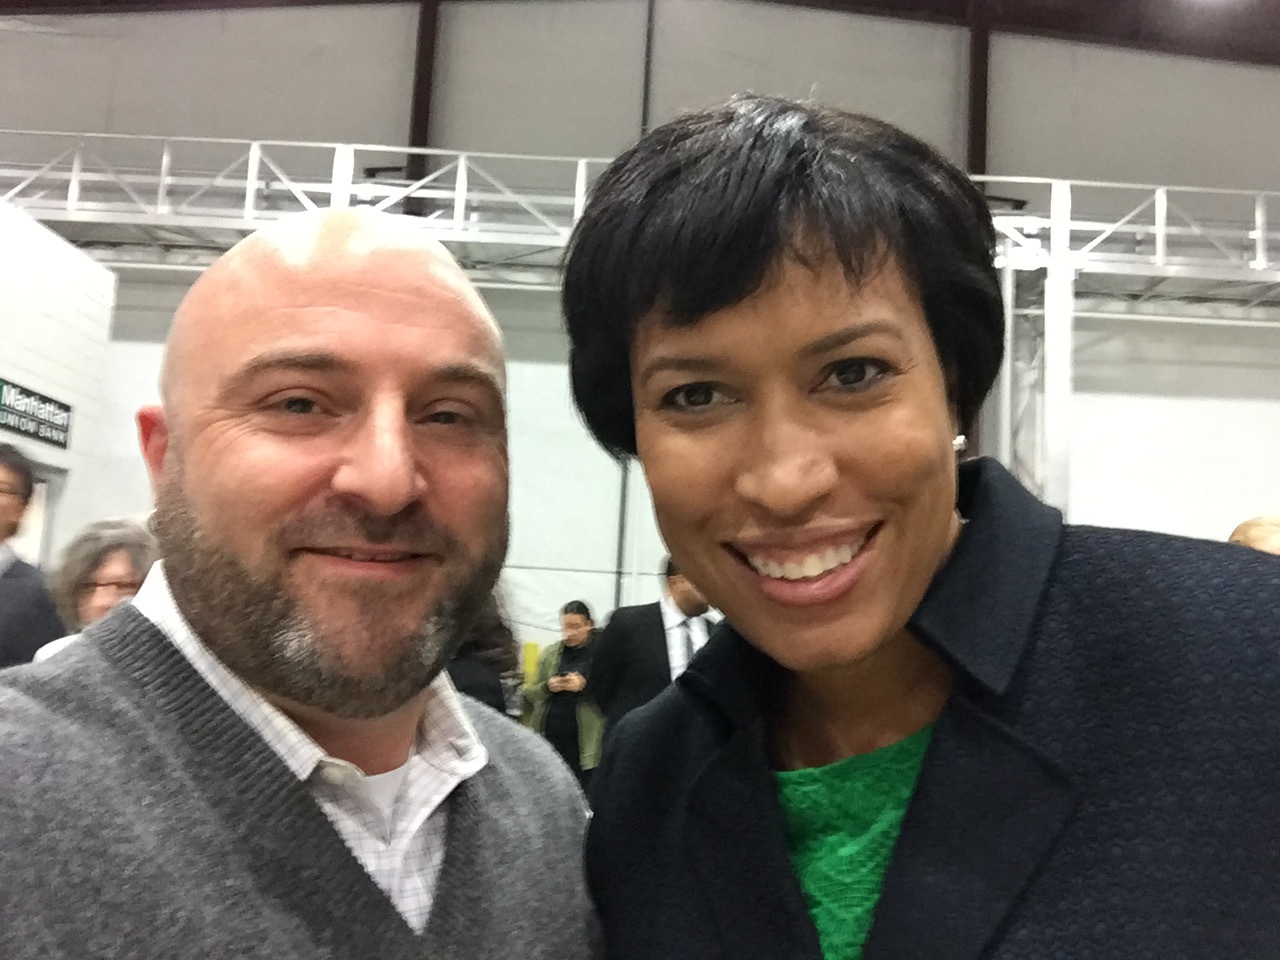  DC Mayor Muriel Bowser poses for a selfie with Drew at the MPD Community Engagement Academy. December 2, 2015 